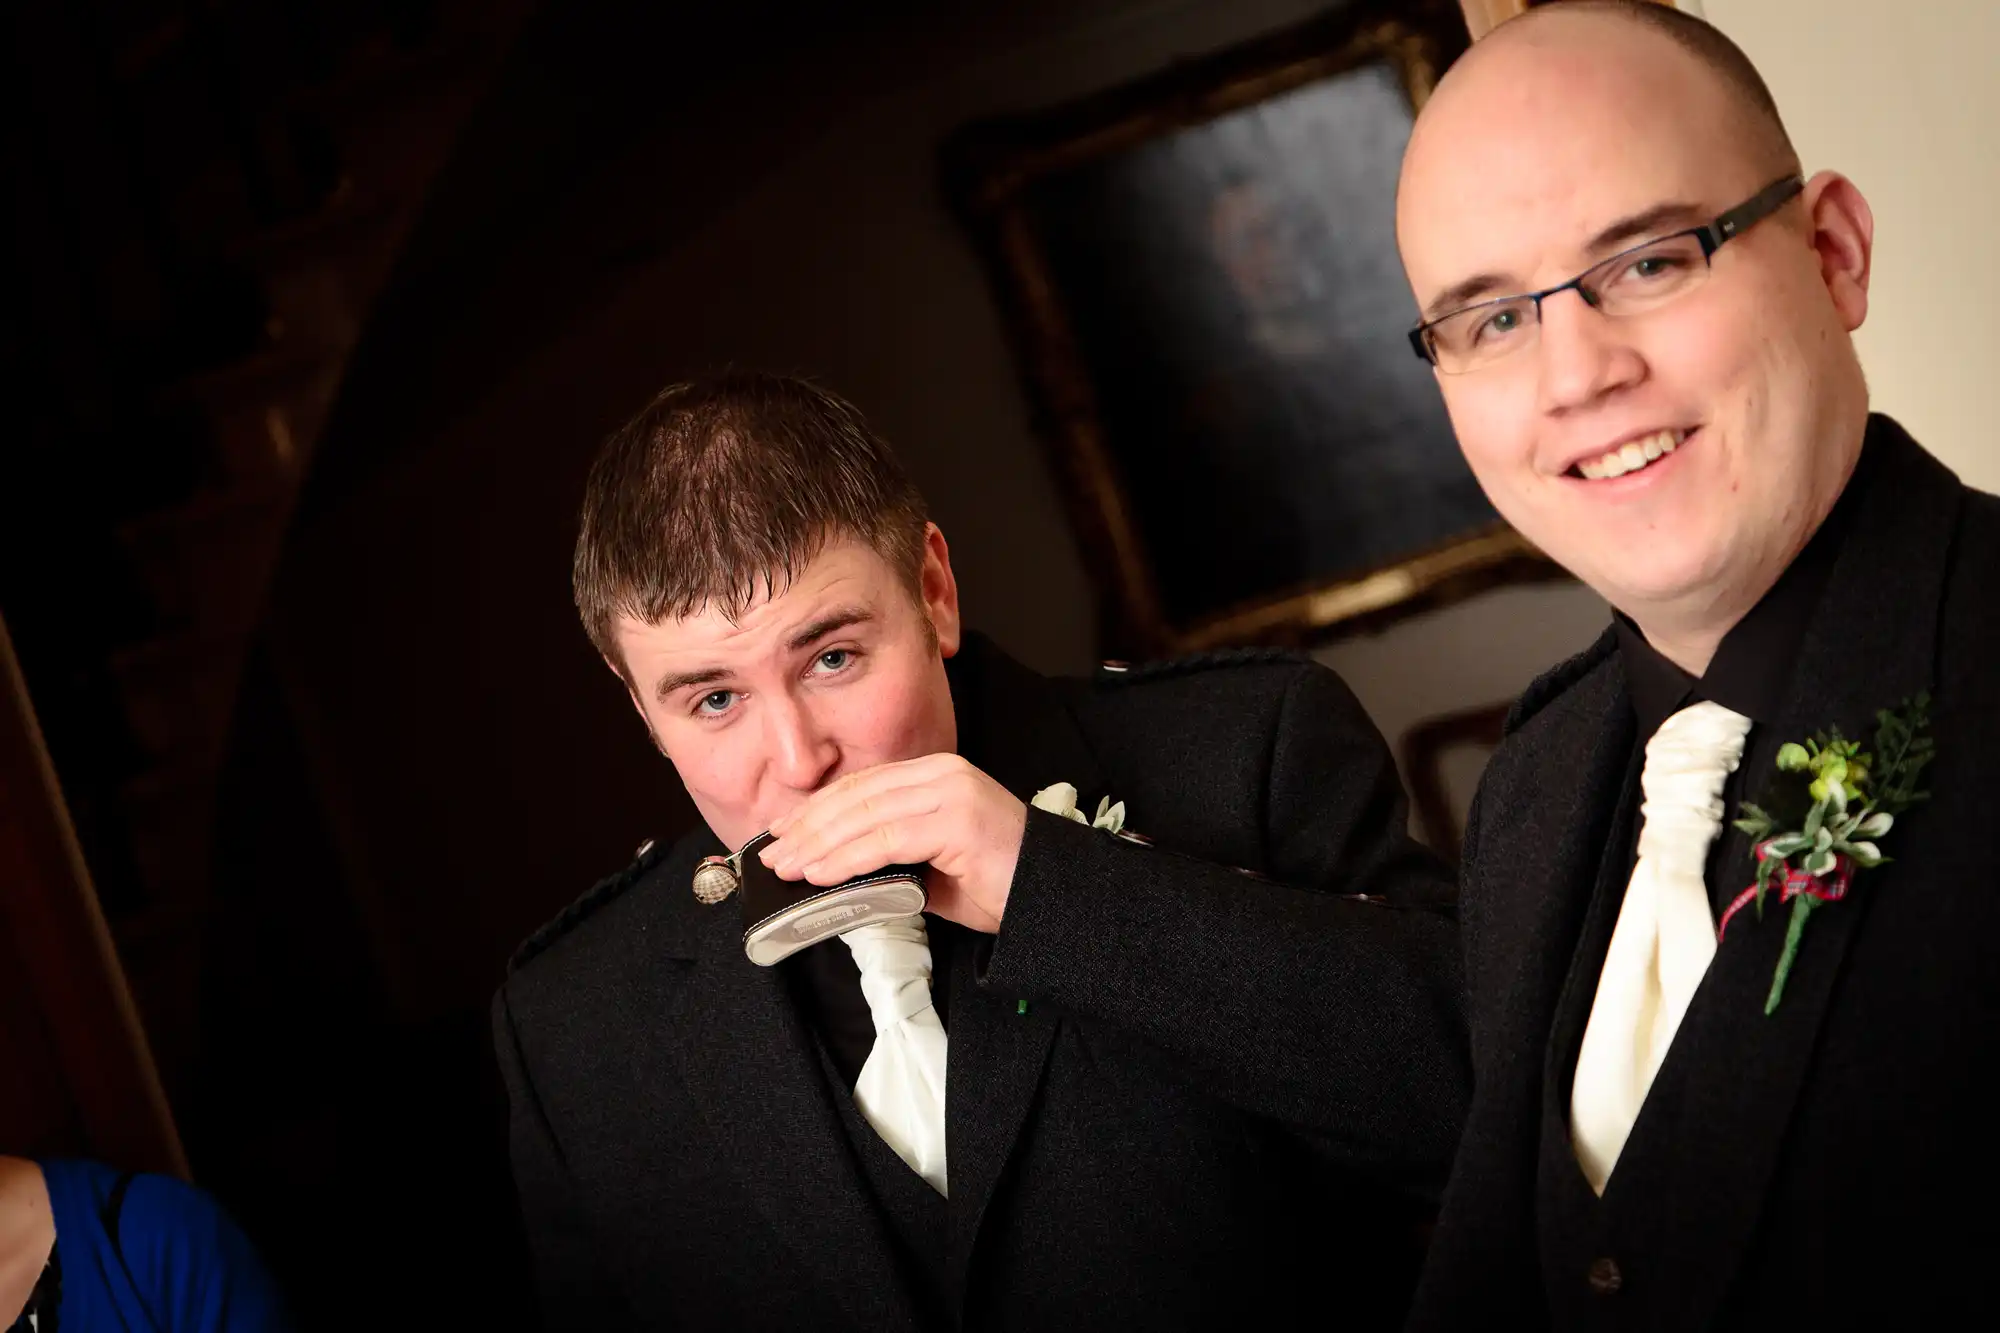 A man in a dark military uniform kisses the hand of his partner, likely during a wedding, while another man in a black tuxedo smiles at the camera.